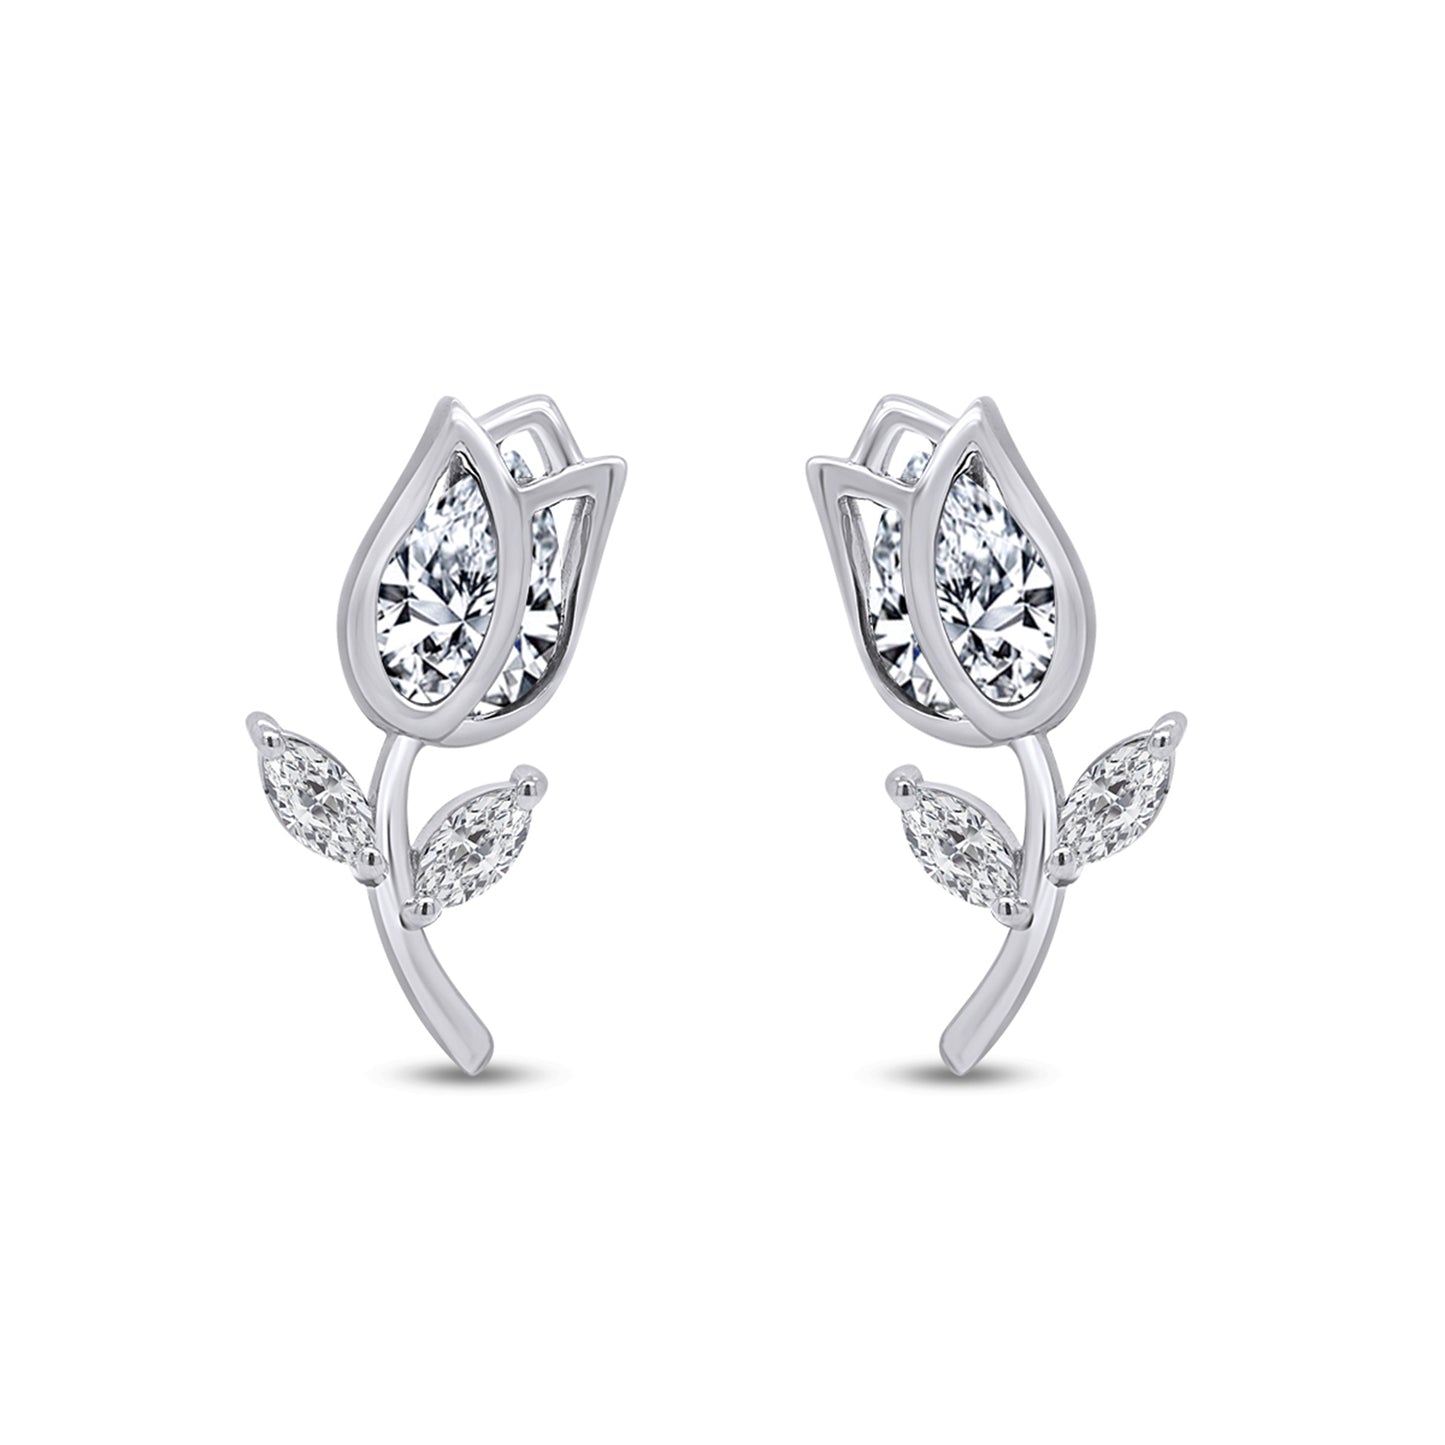 Pear Shape Simulated Birthstone & Marquise Cut White Cubic Zirconia Rose Flower Stud Earrings For Women In 925 Sterling Silver